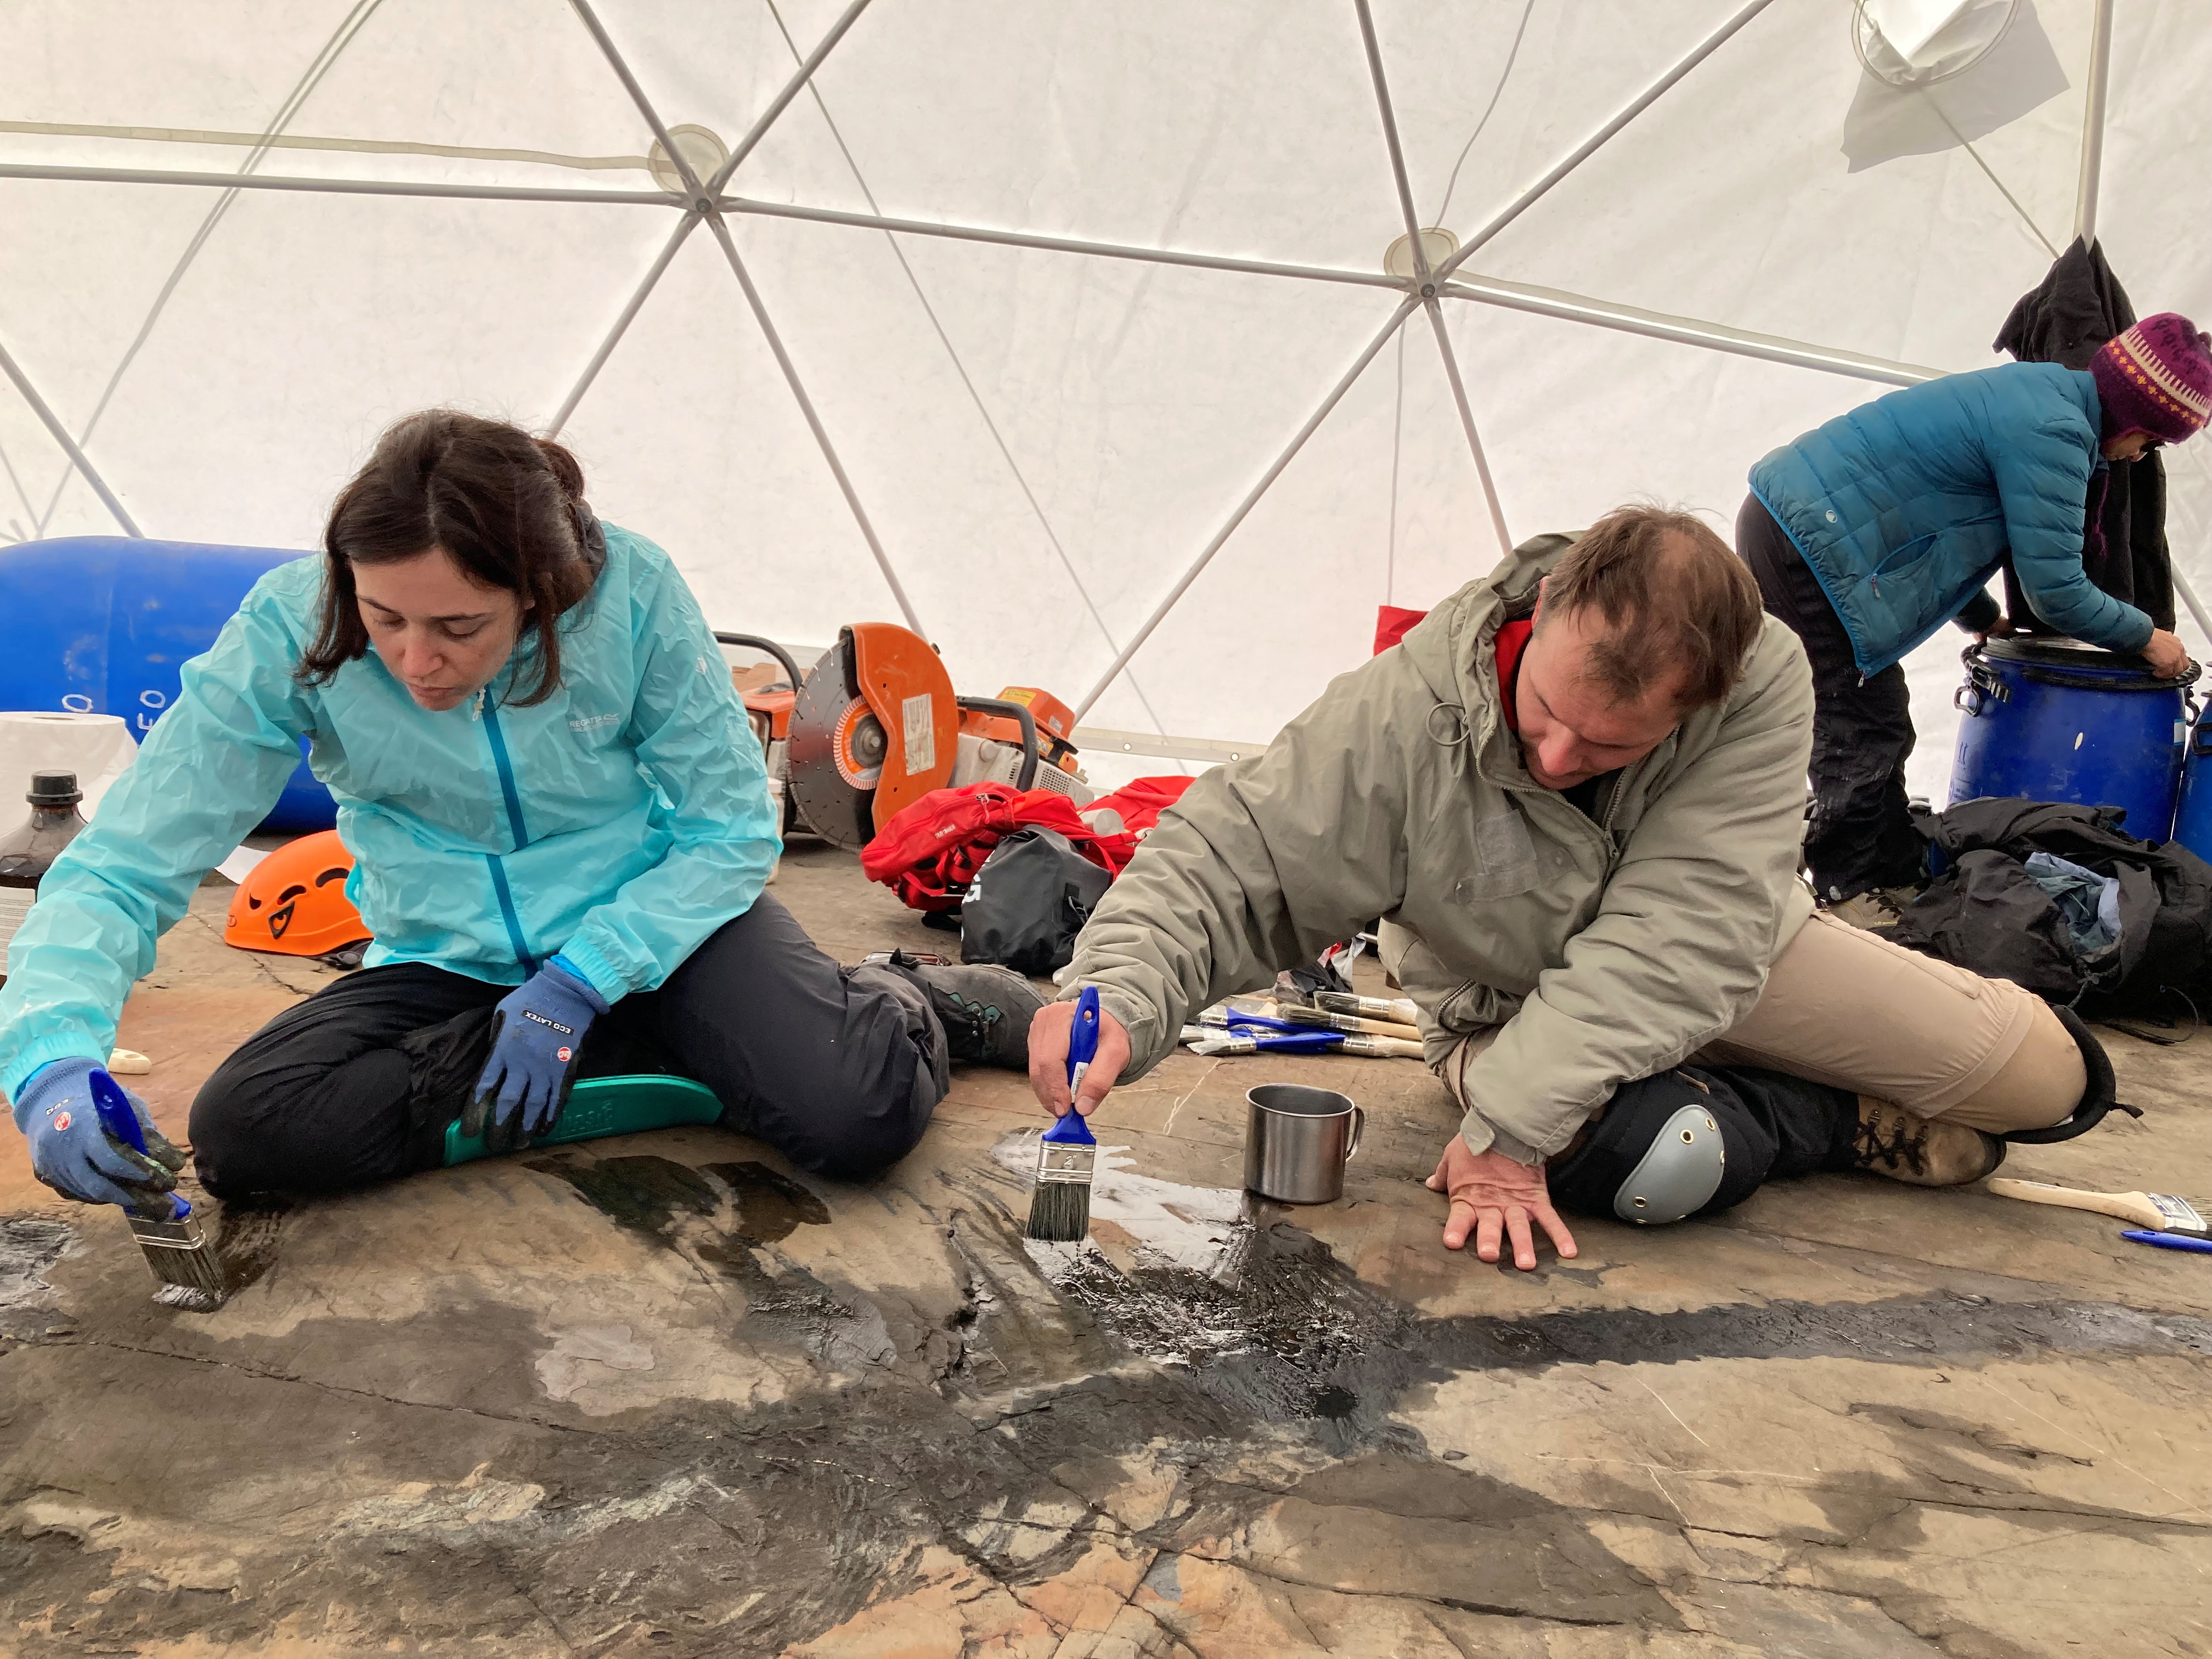 Paleontologists of the GAIA Antarctic Research Center of the University of Magallanes recover the first fossil of a four-meter Ichthyosaur at Tyndall Glacier area in the Chilean Patagonia, Magallanes